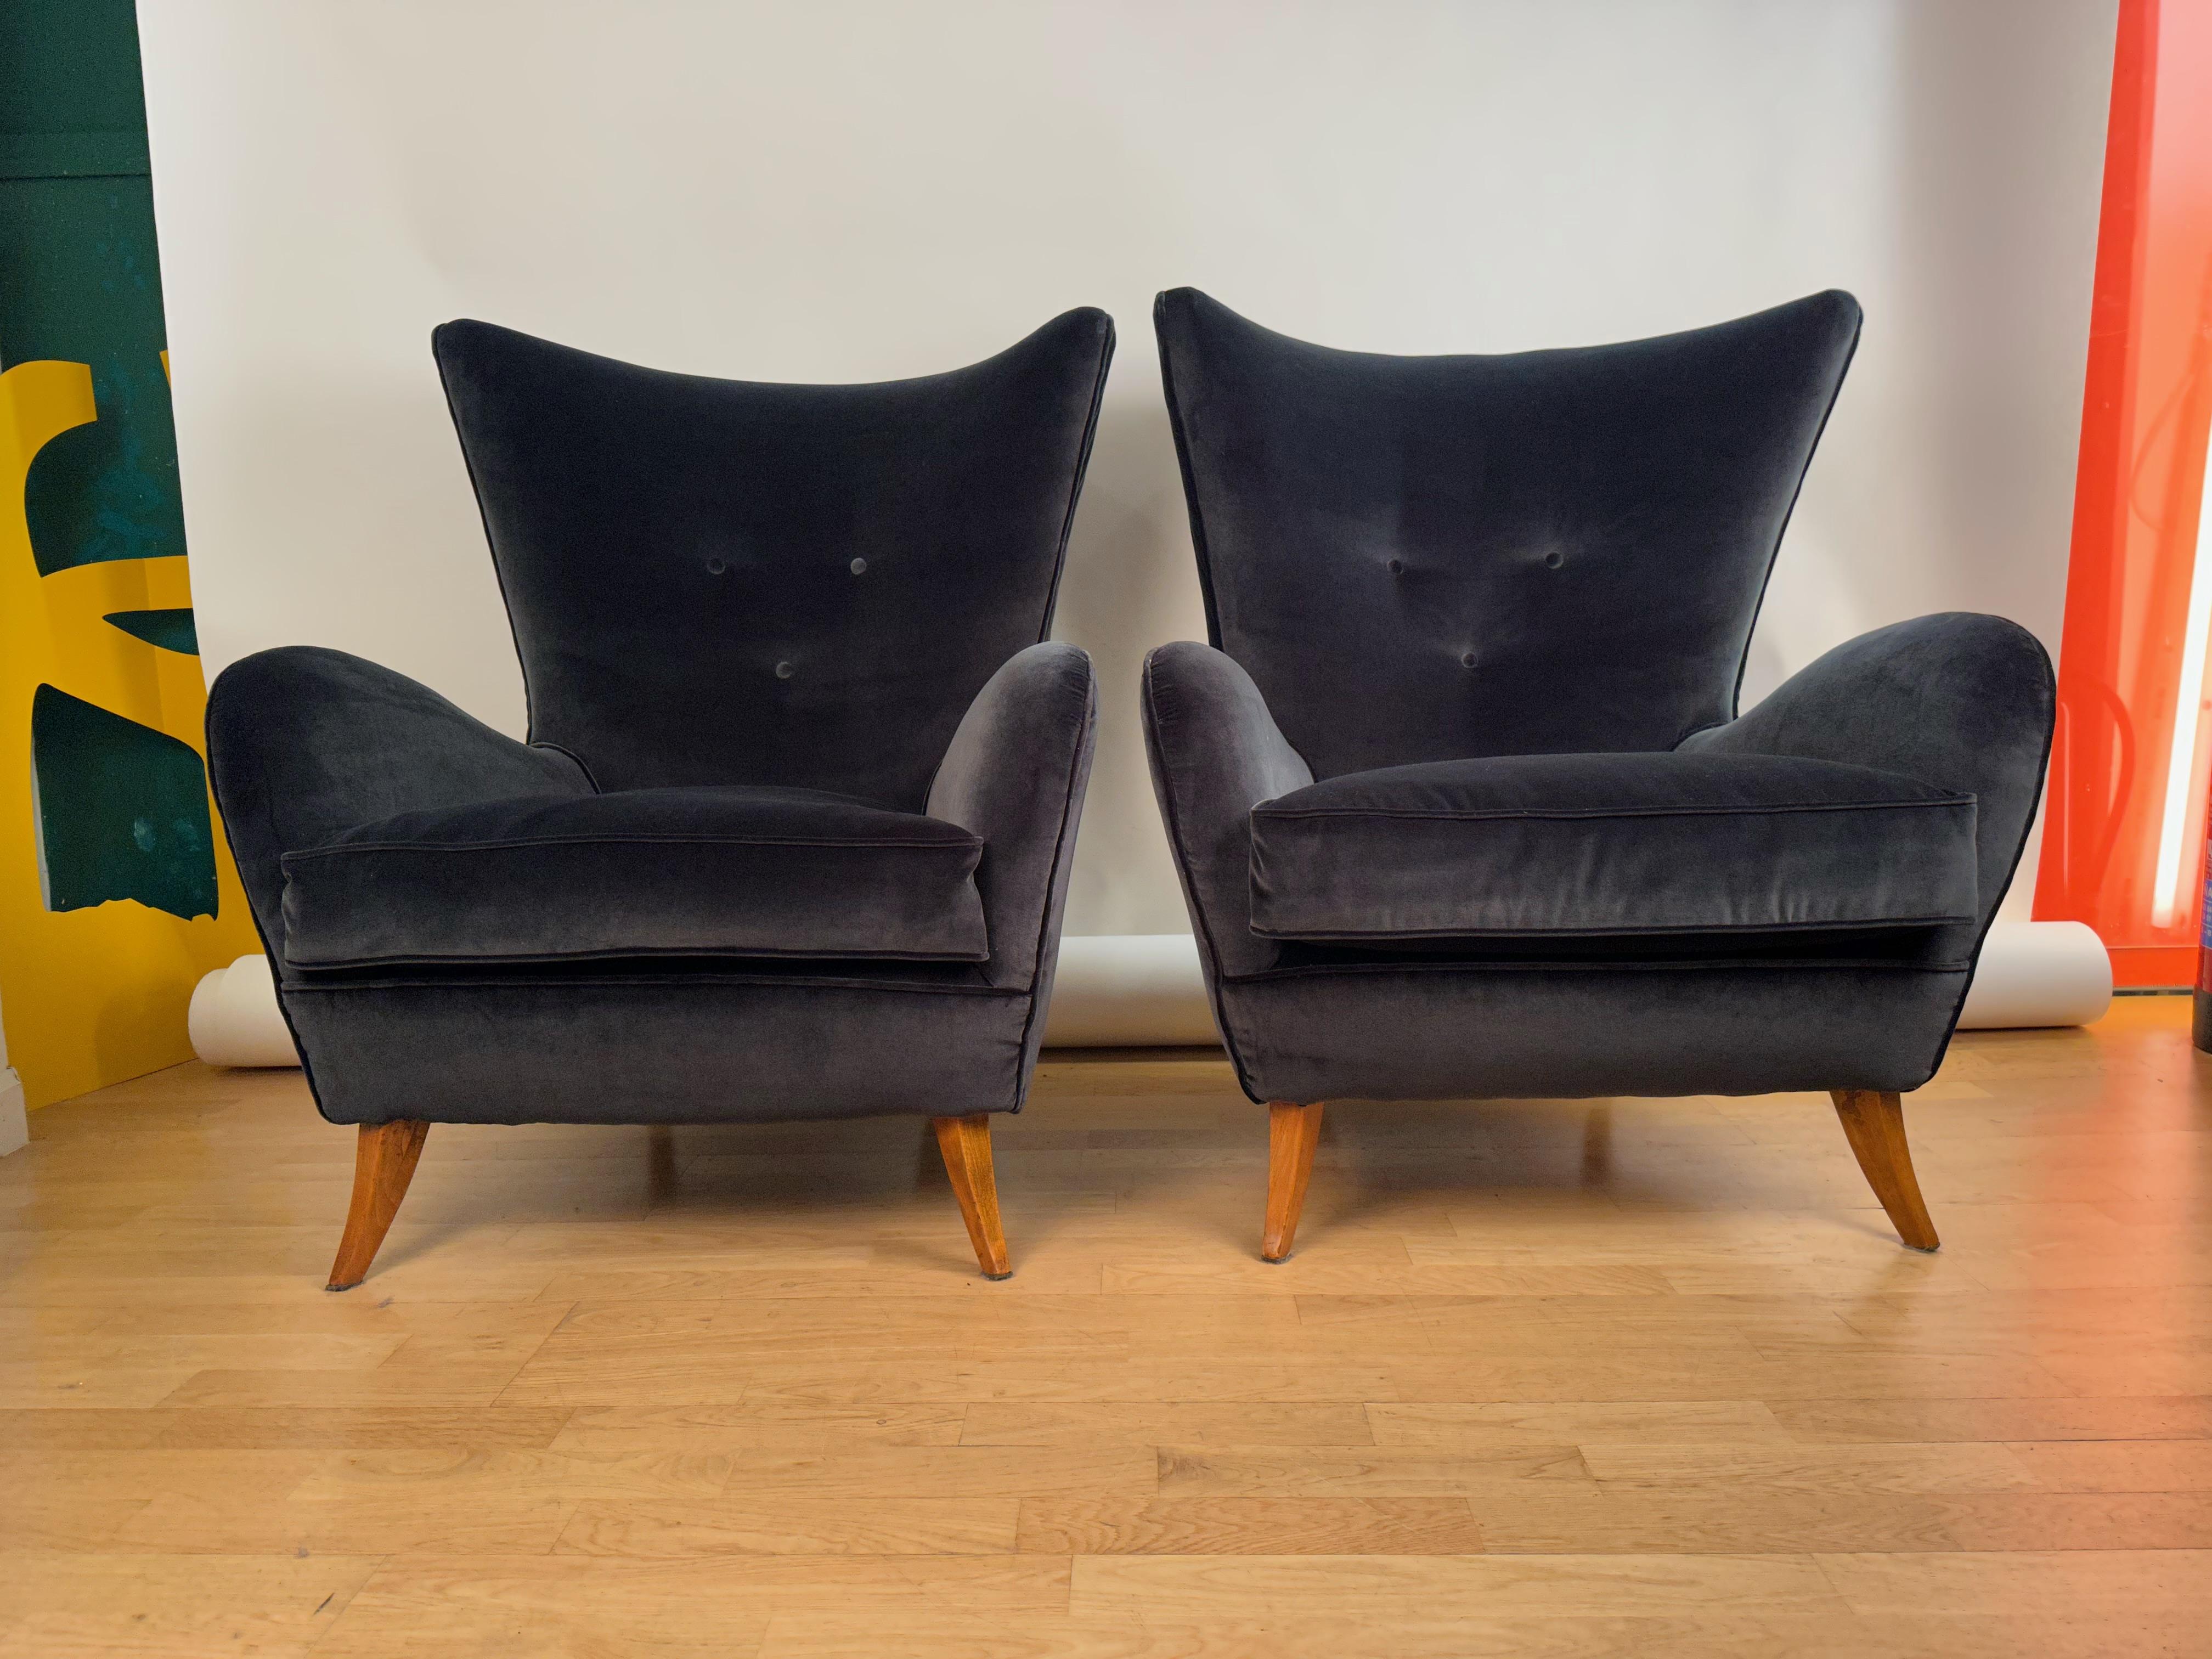 Elegant pair of 1950s Italian Mid´Century armchairs.Wood frame,prime blue velvet and feather cushions.This model meets functionality , quality and beautiful design shapes.
The high wing-back and the upholstered armrests back an astonishing